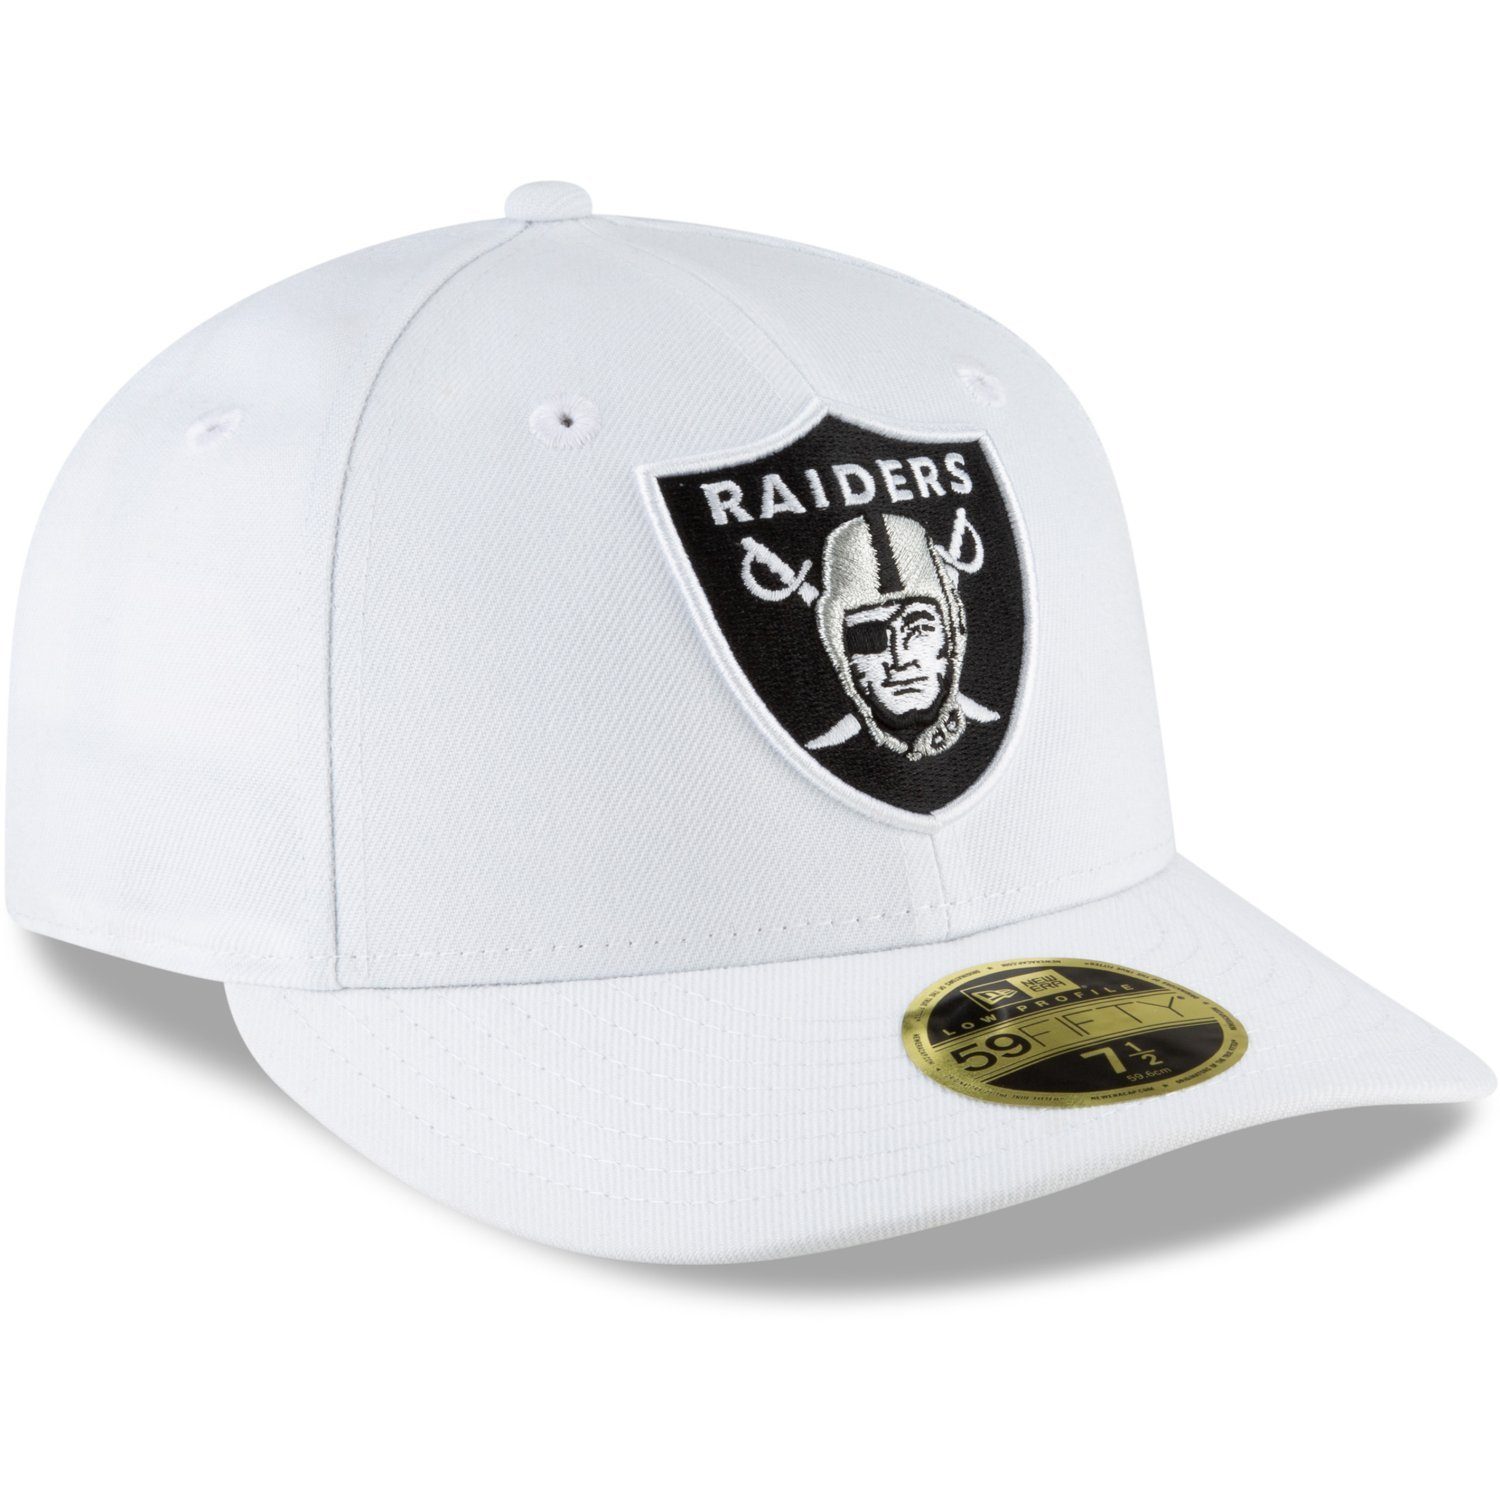 59Fifty Fitted Profile Era Las Raiders Vegas Weiß Low New Cap